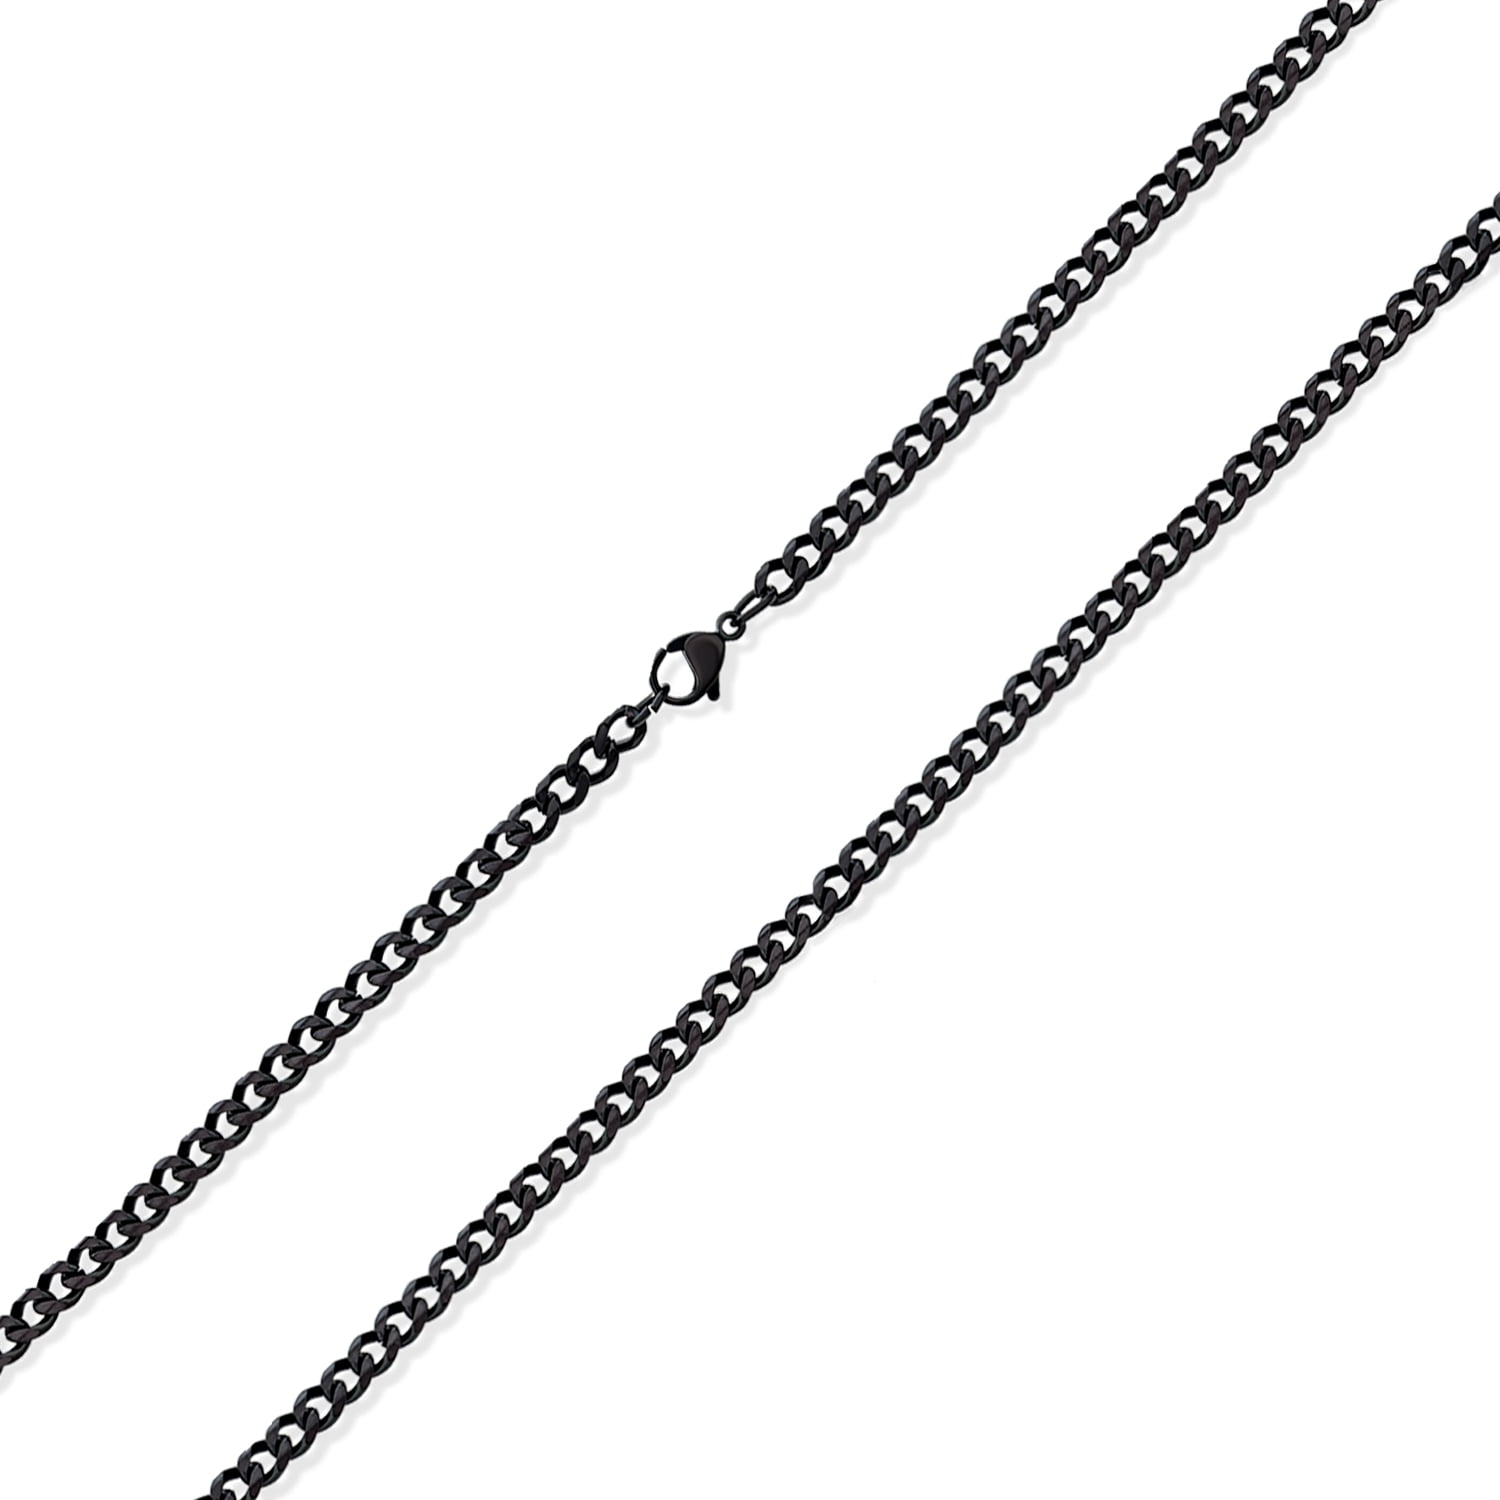 24"Stainless Steel 9x4mm Silver/Gold/Black Cuban Curb Chain Necklace Pendant*J28 